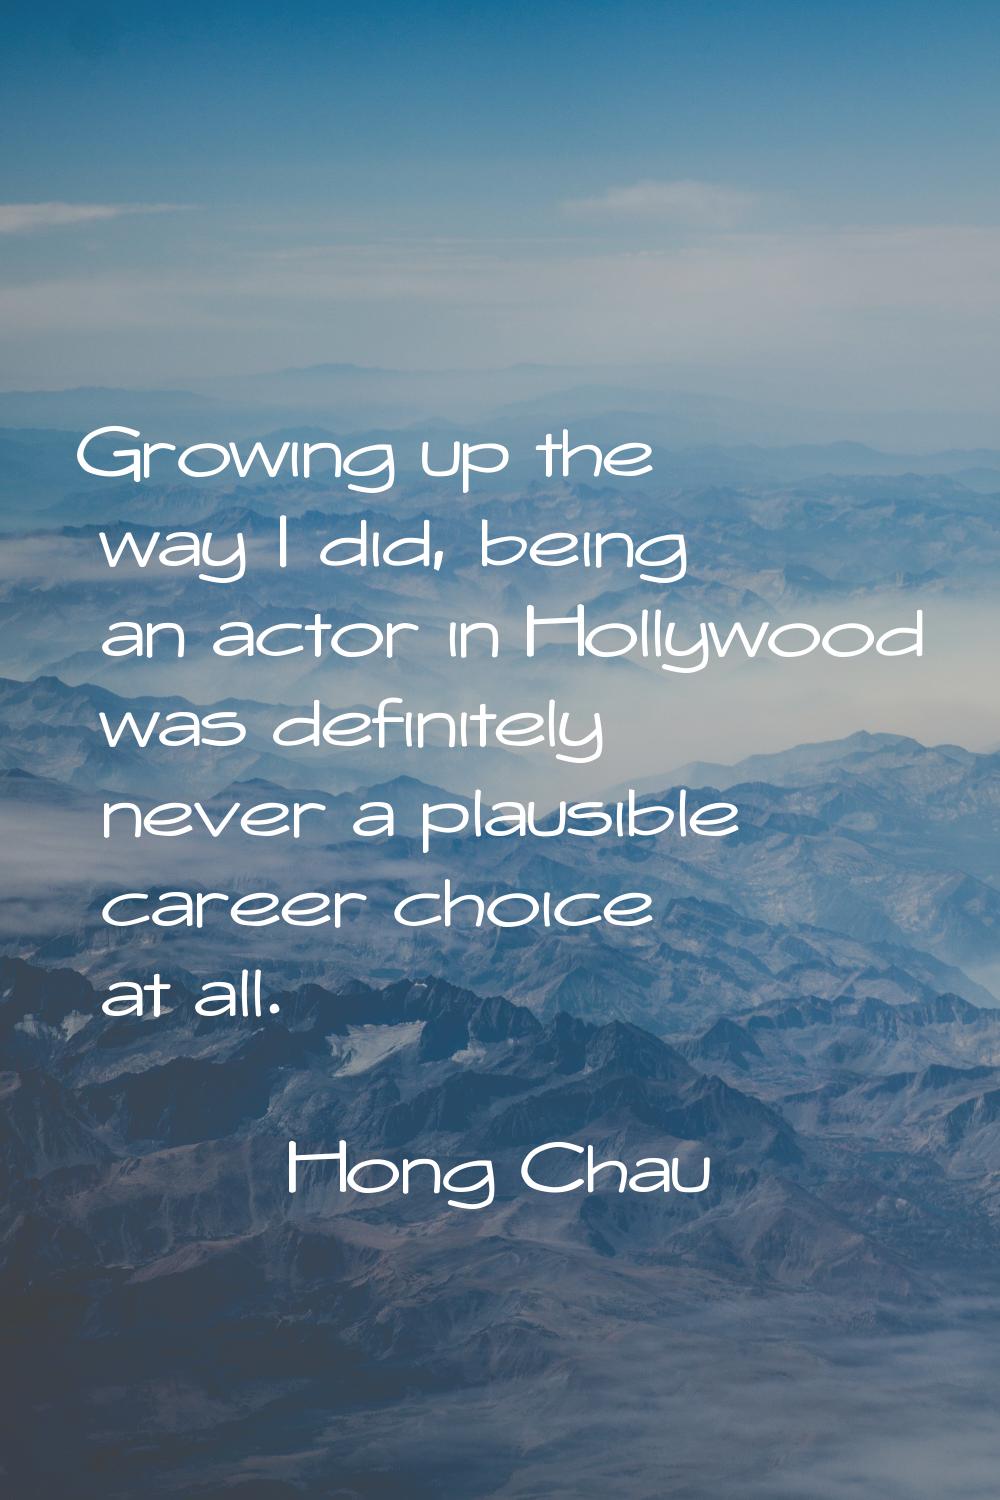 Growing up the way I did, being an actor in Hollywood was definitely never a plausible career choic